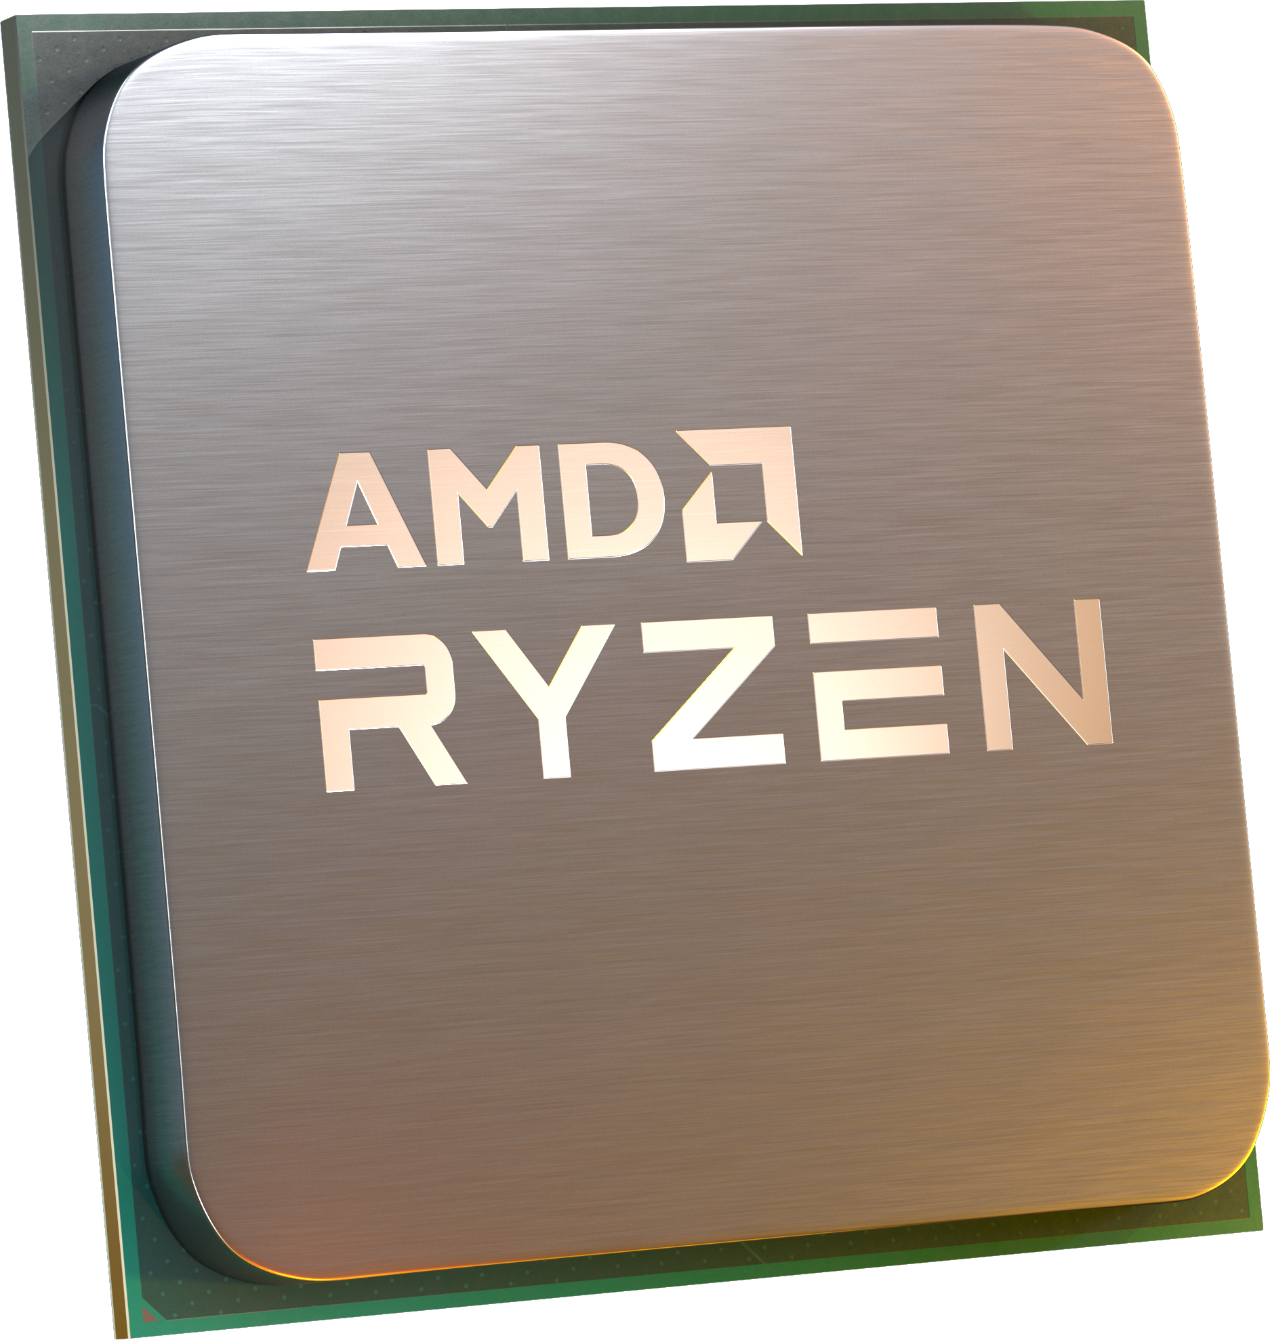 Процесор AMD Ryzen 7 5700X, AM4 Socket, 8 Cores, 16 Threads, 3.4GHz(Up to 4.6GHz), 36MB Cache, 65W, Tray